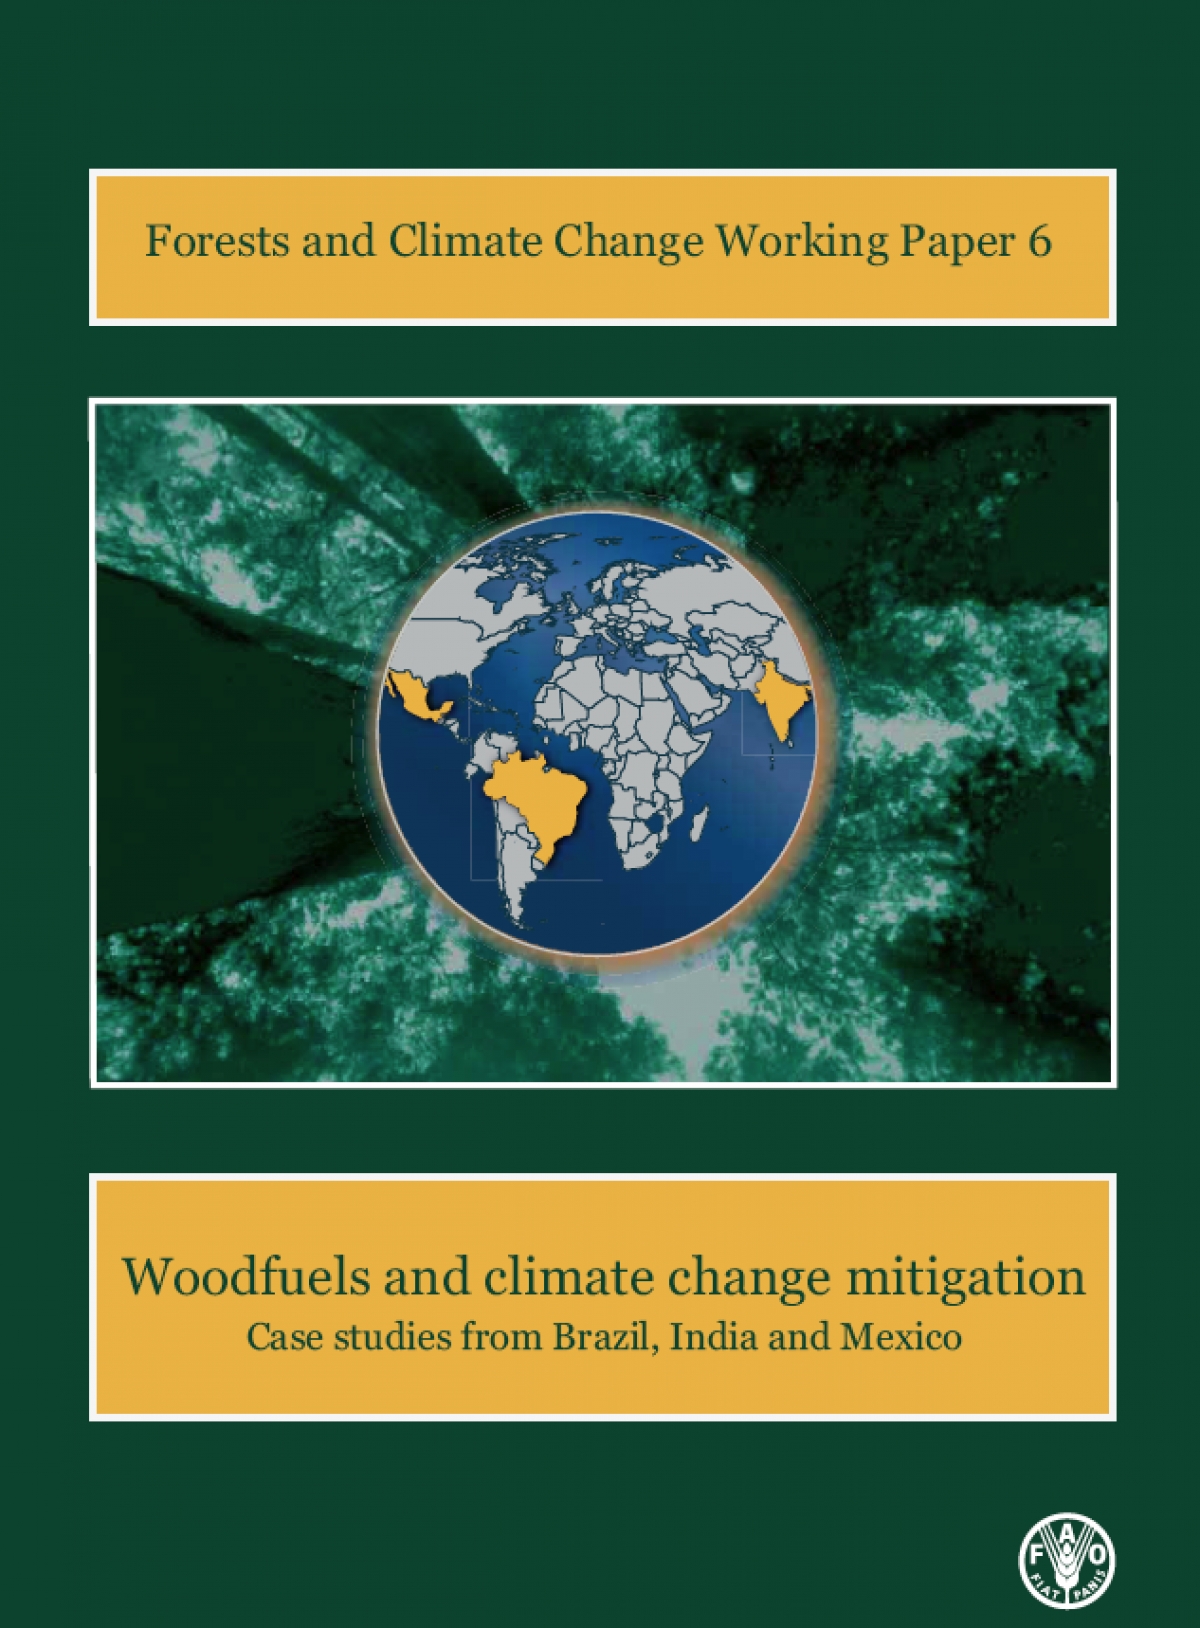 literature review of climate change